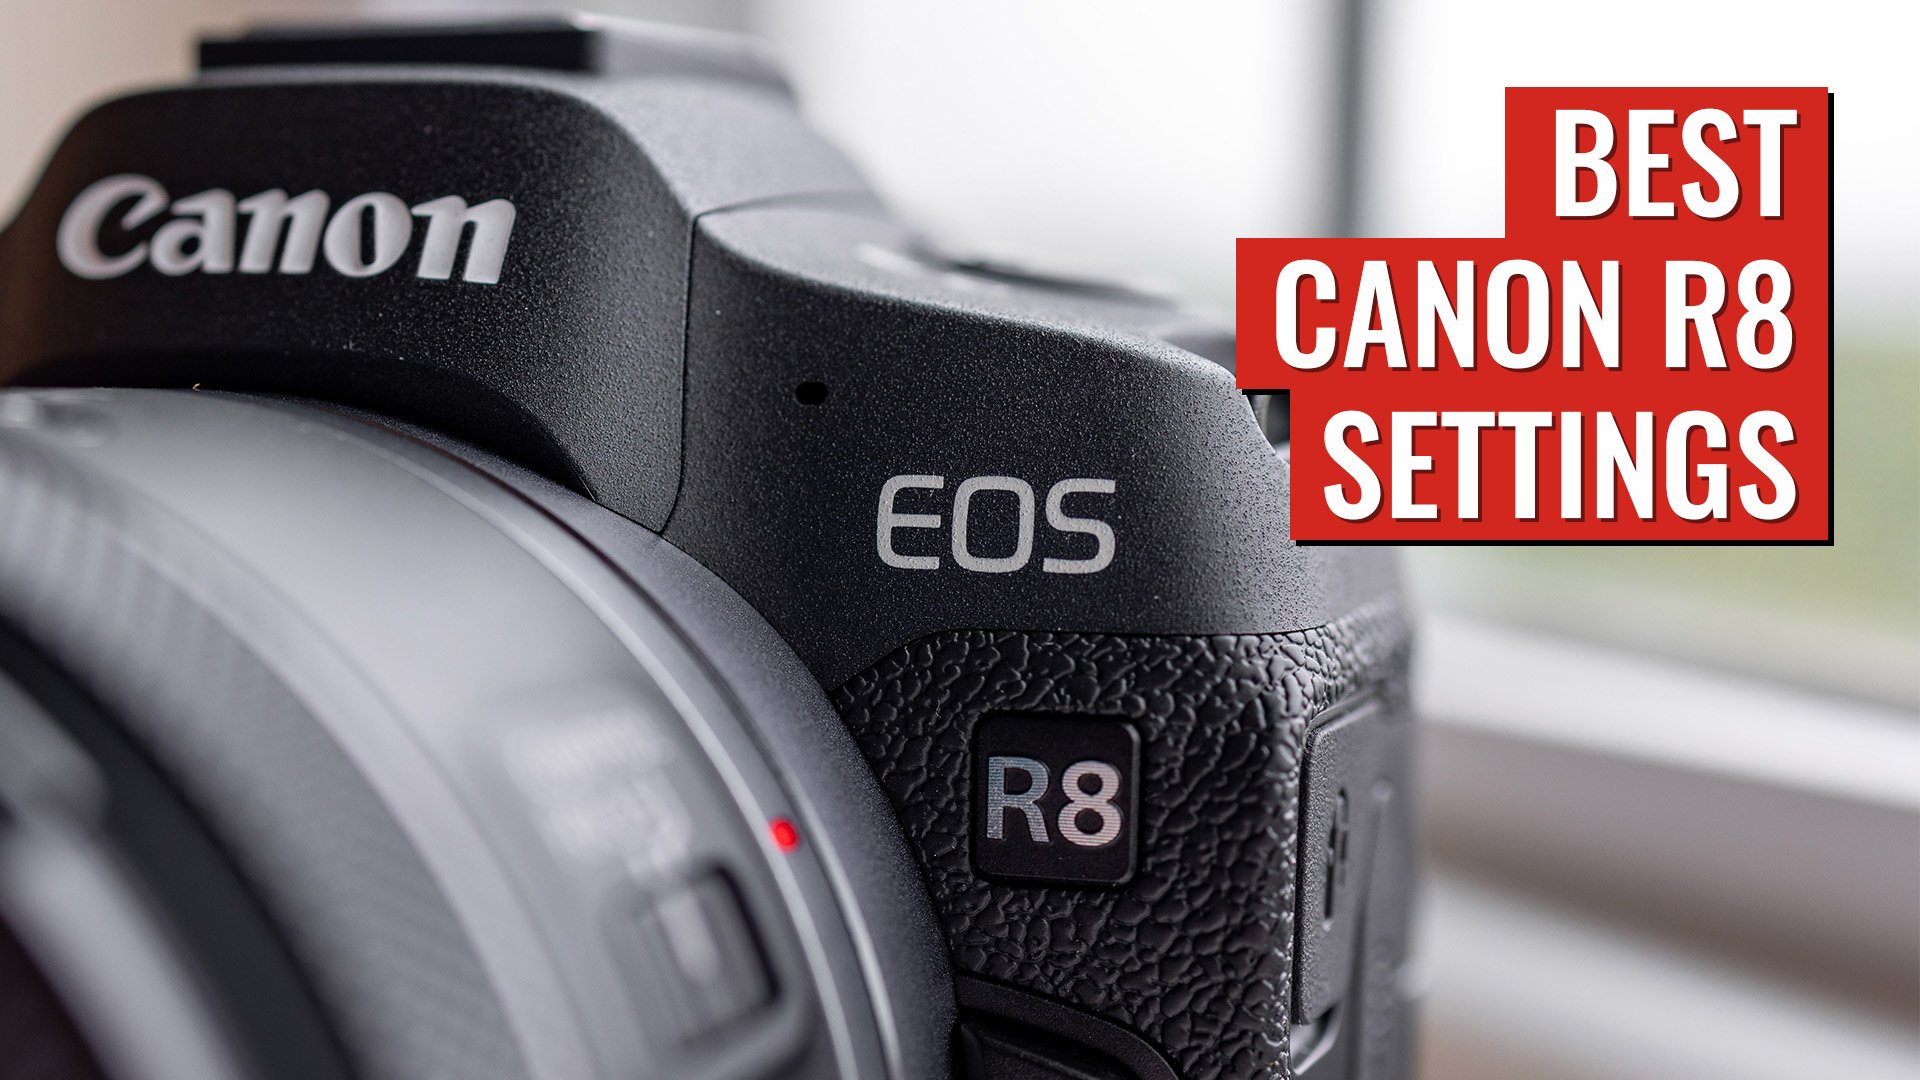 Recommended Canon EOS R8 Settings (R8 Setup Guide)